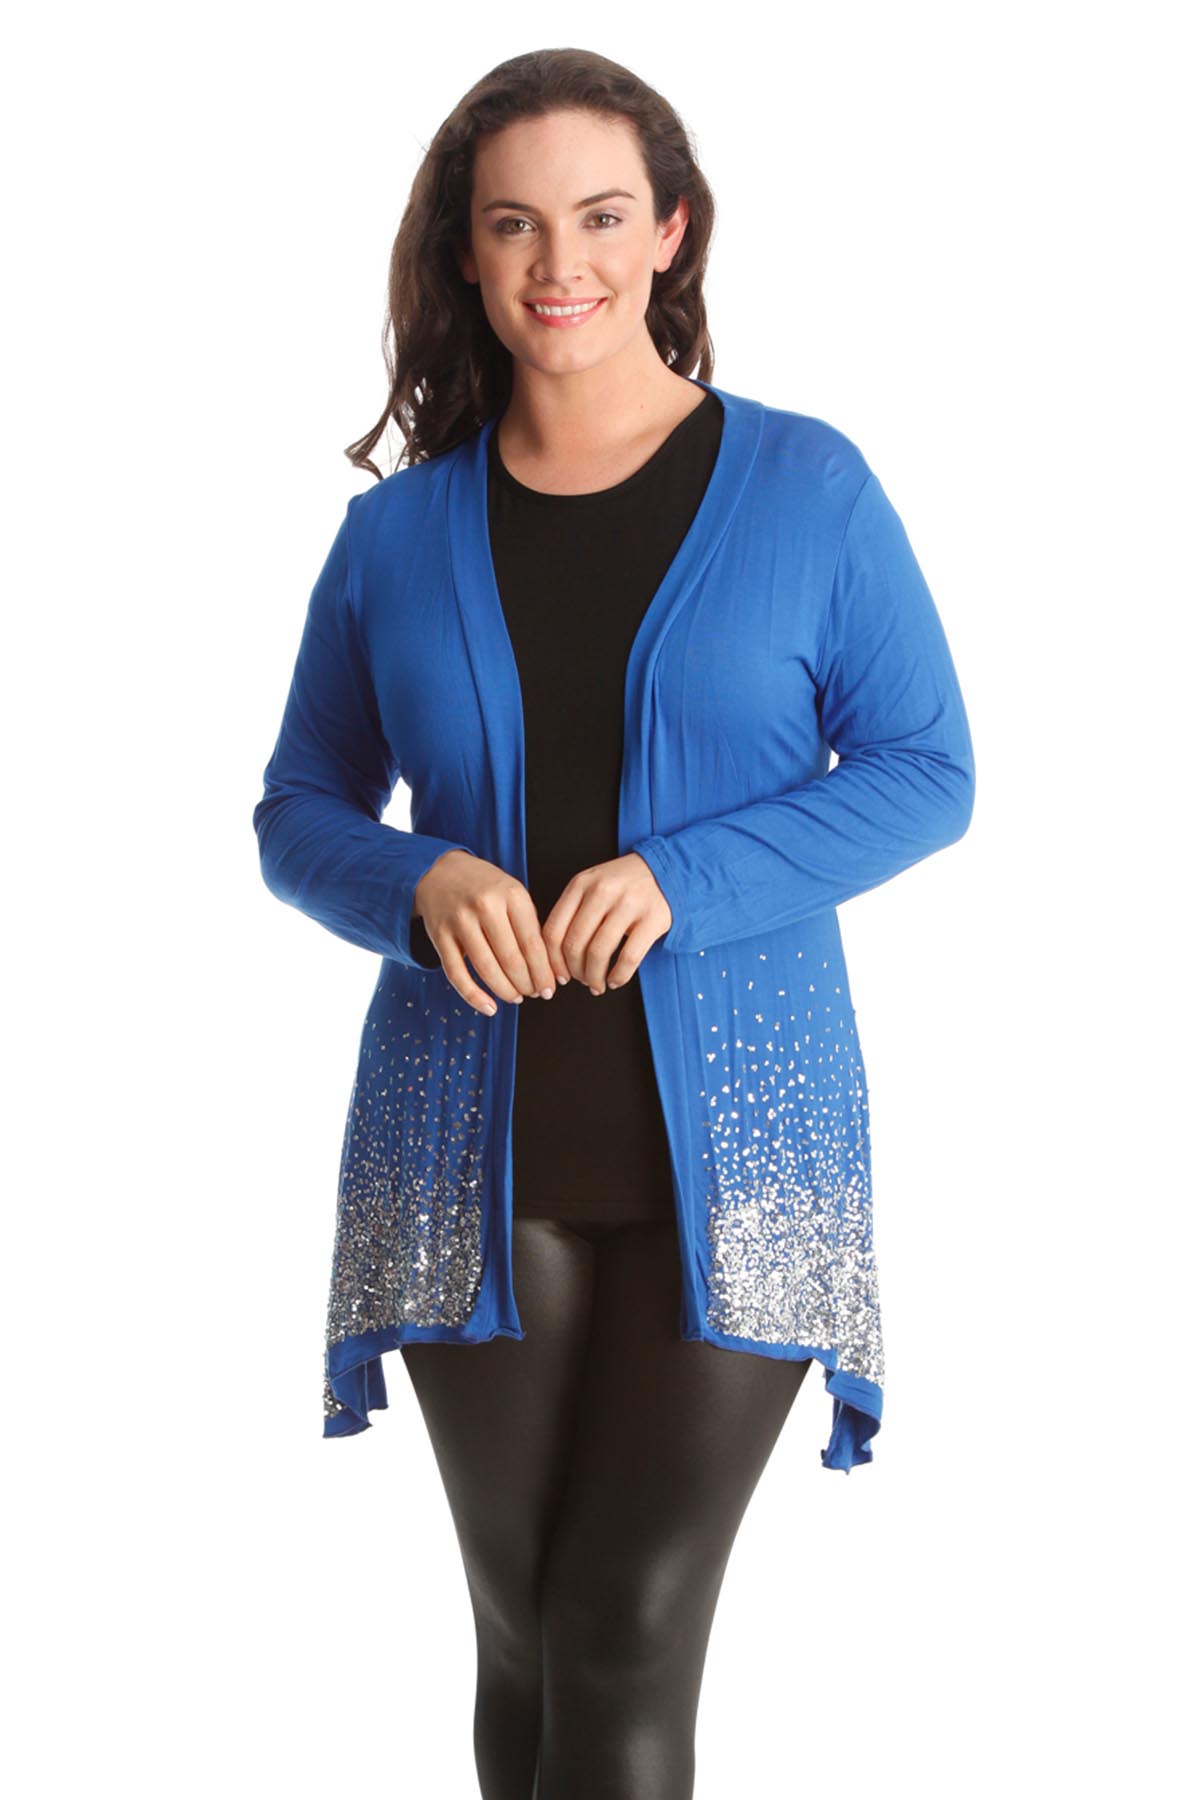 Royal blue cardigan plus size tops for women pound summer online, Knee length casual dresses with sleeves, adidas t shirt game of thrones. 